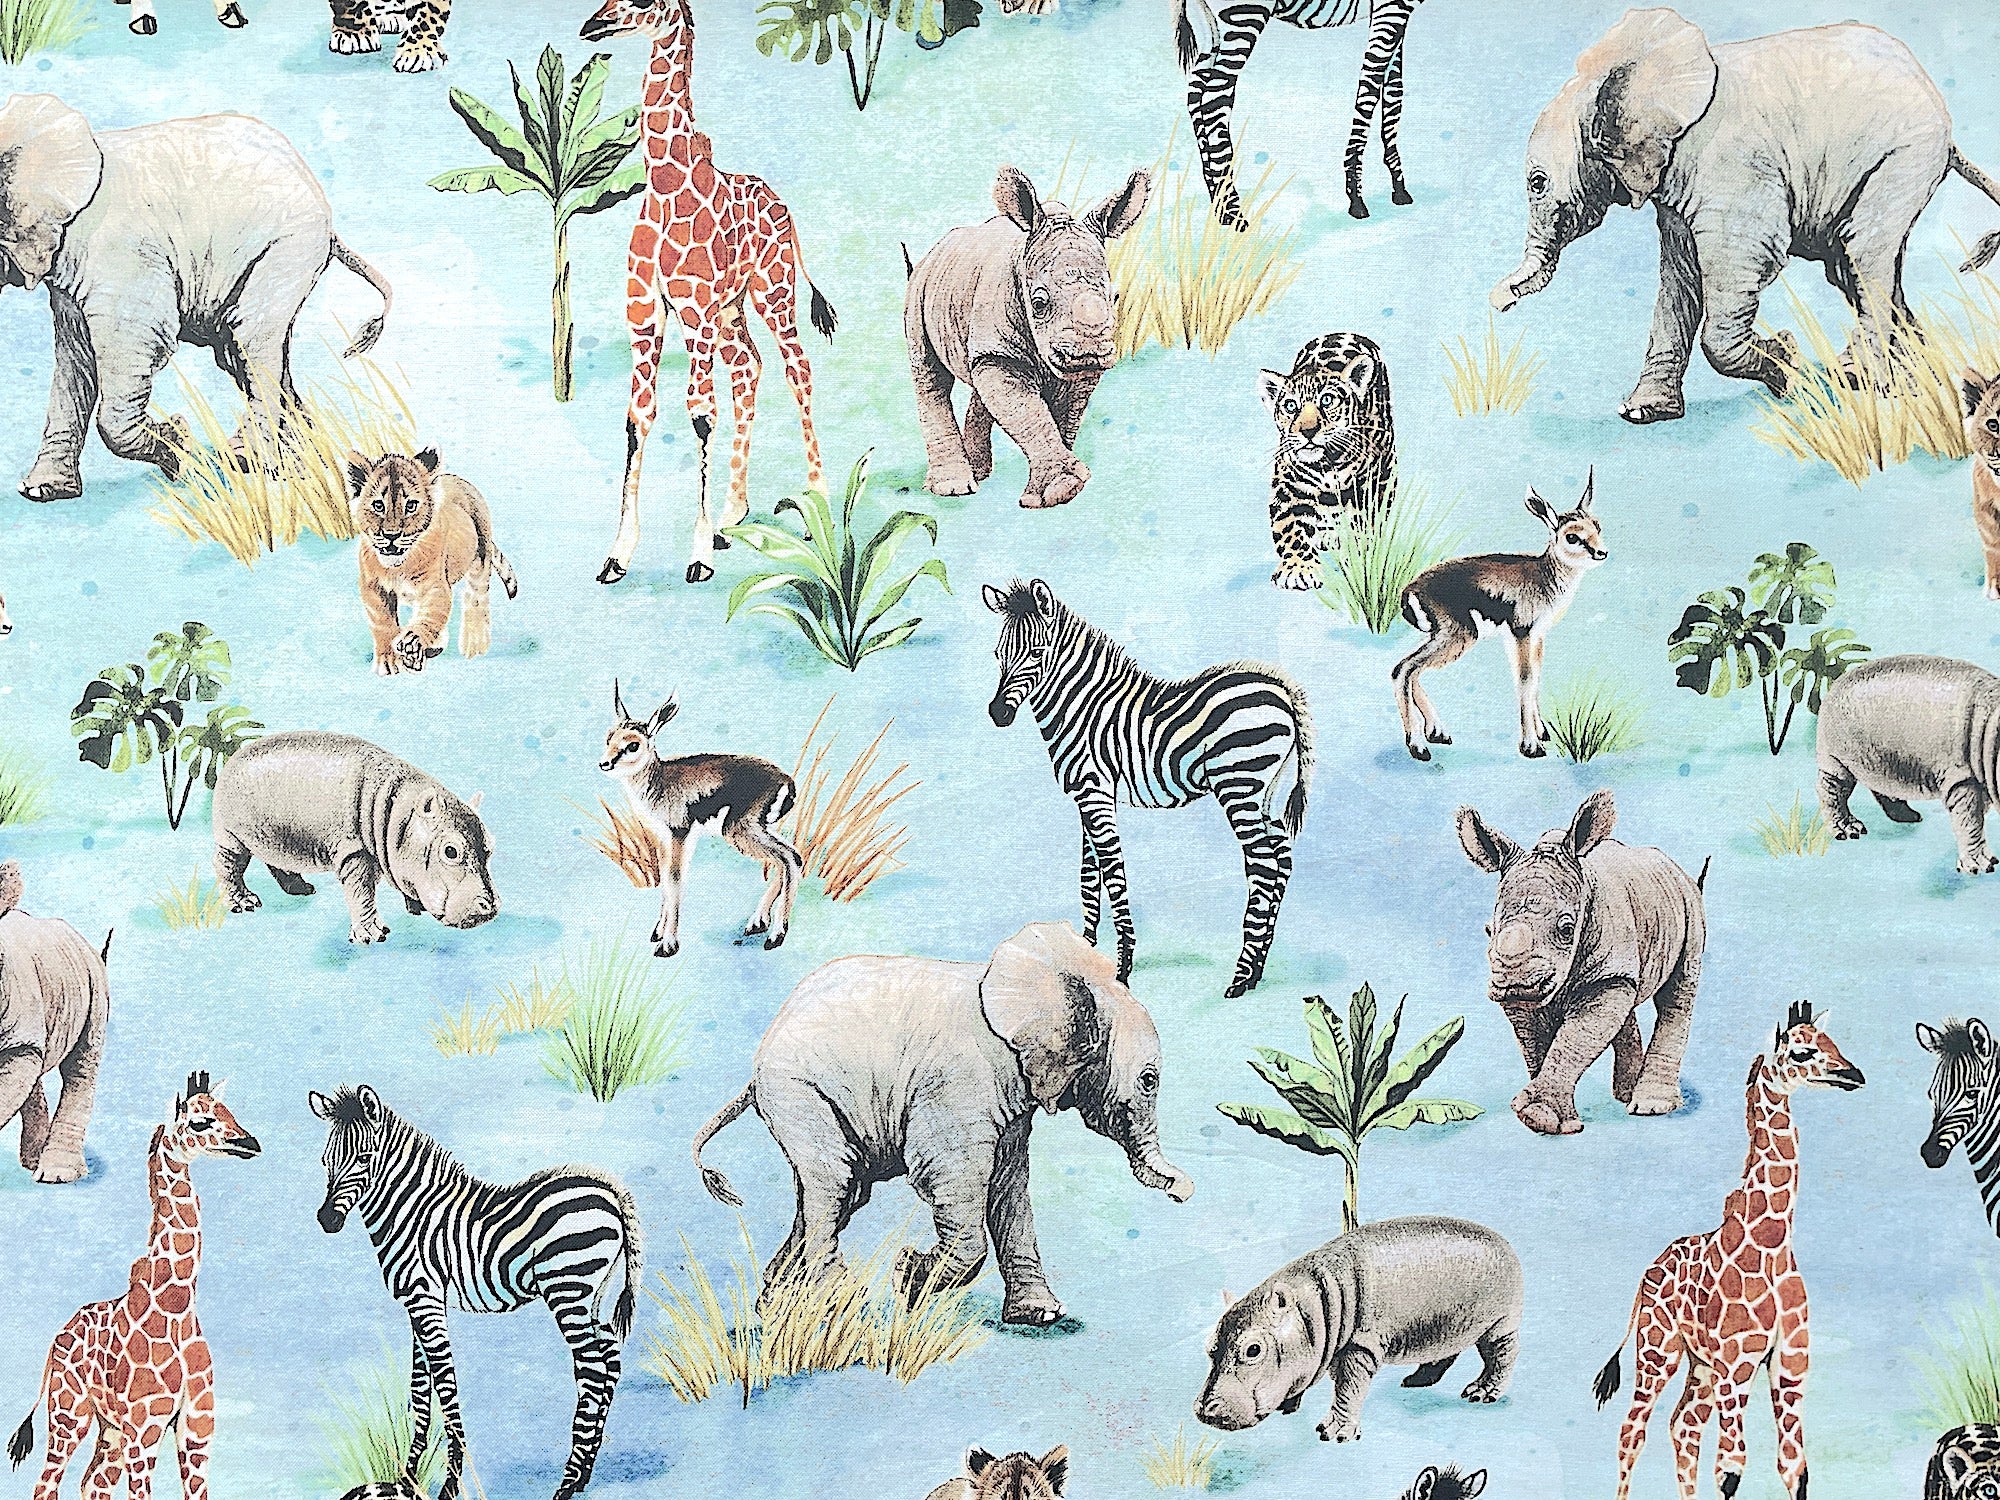 Light blue cotton fabric covered with zebra, giraffe, rhinos, tigers and more.